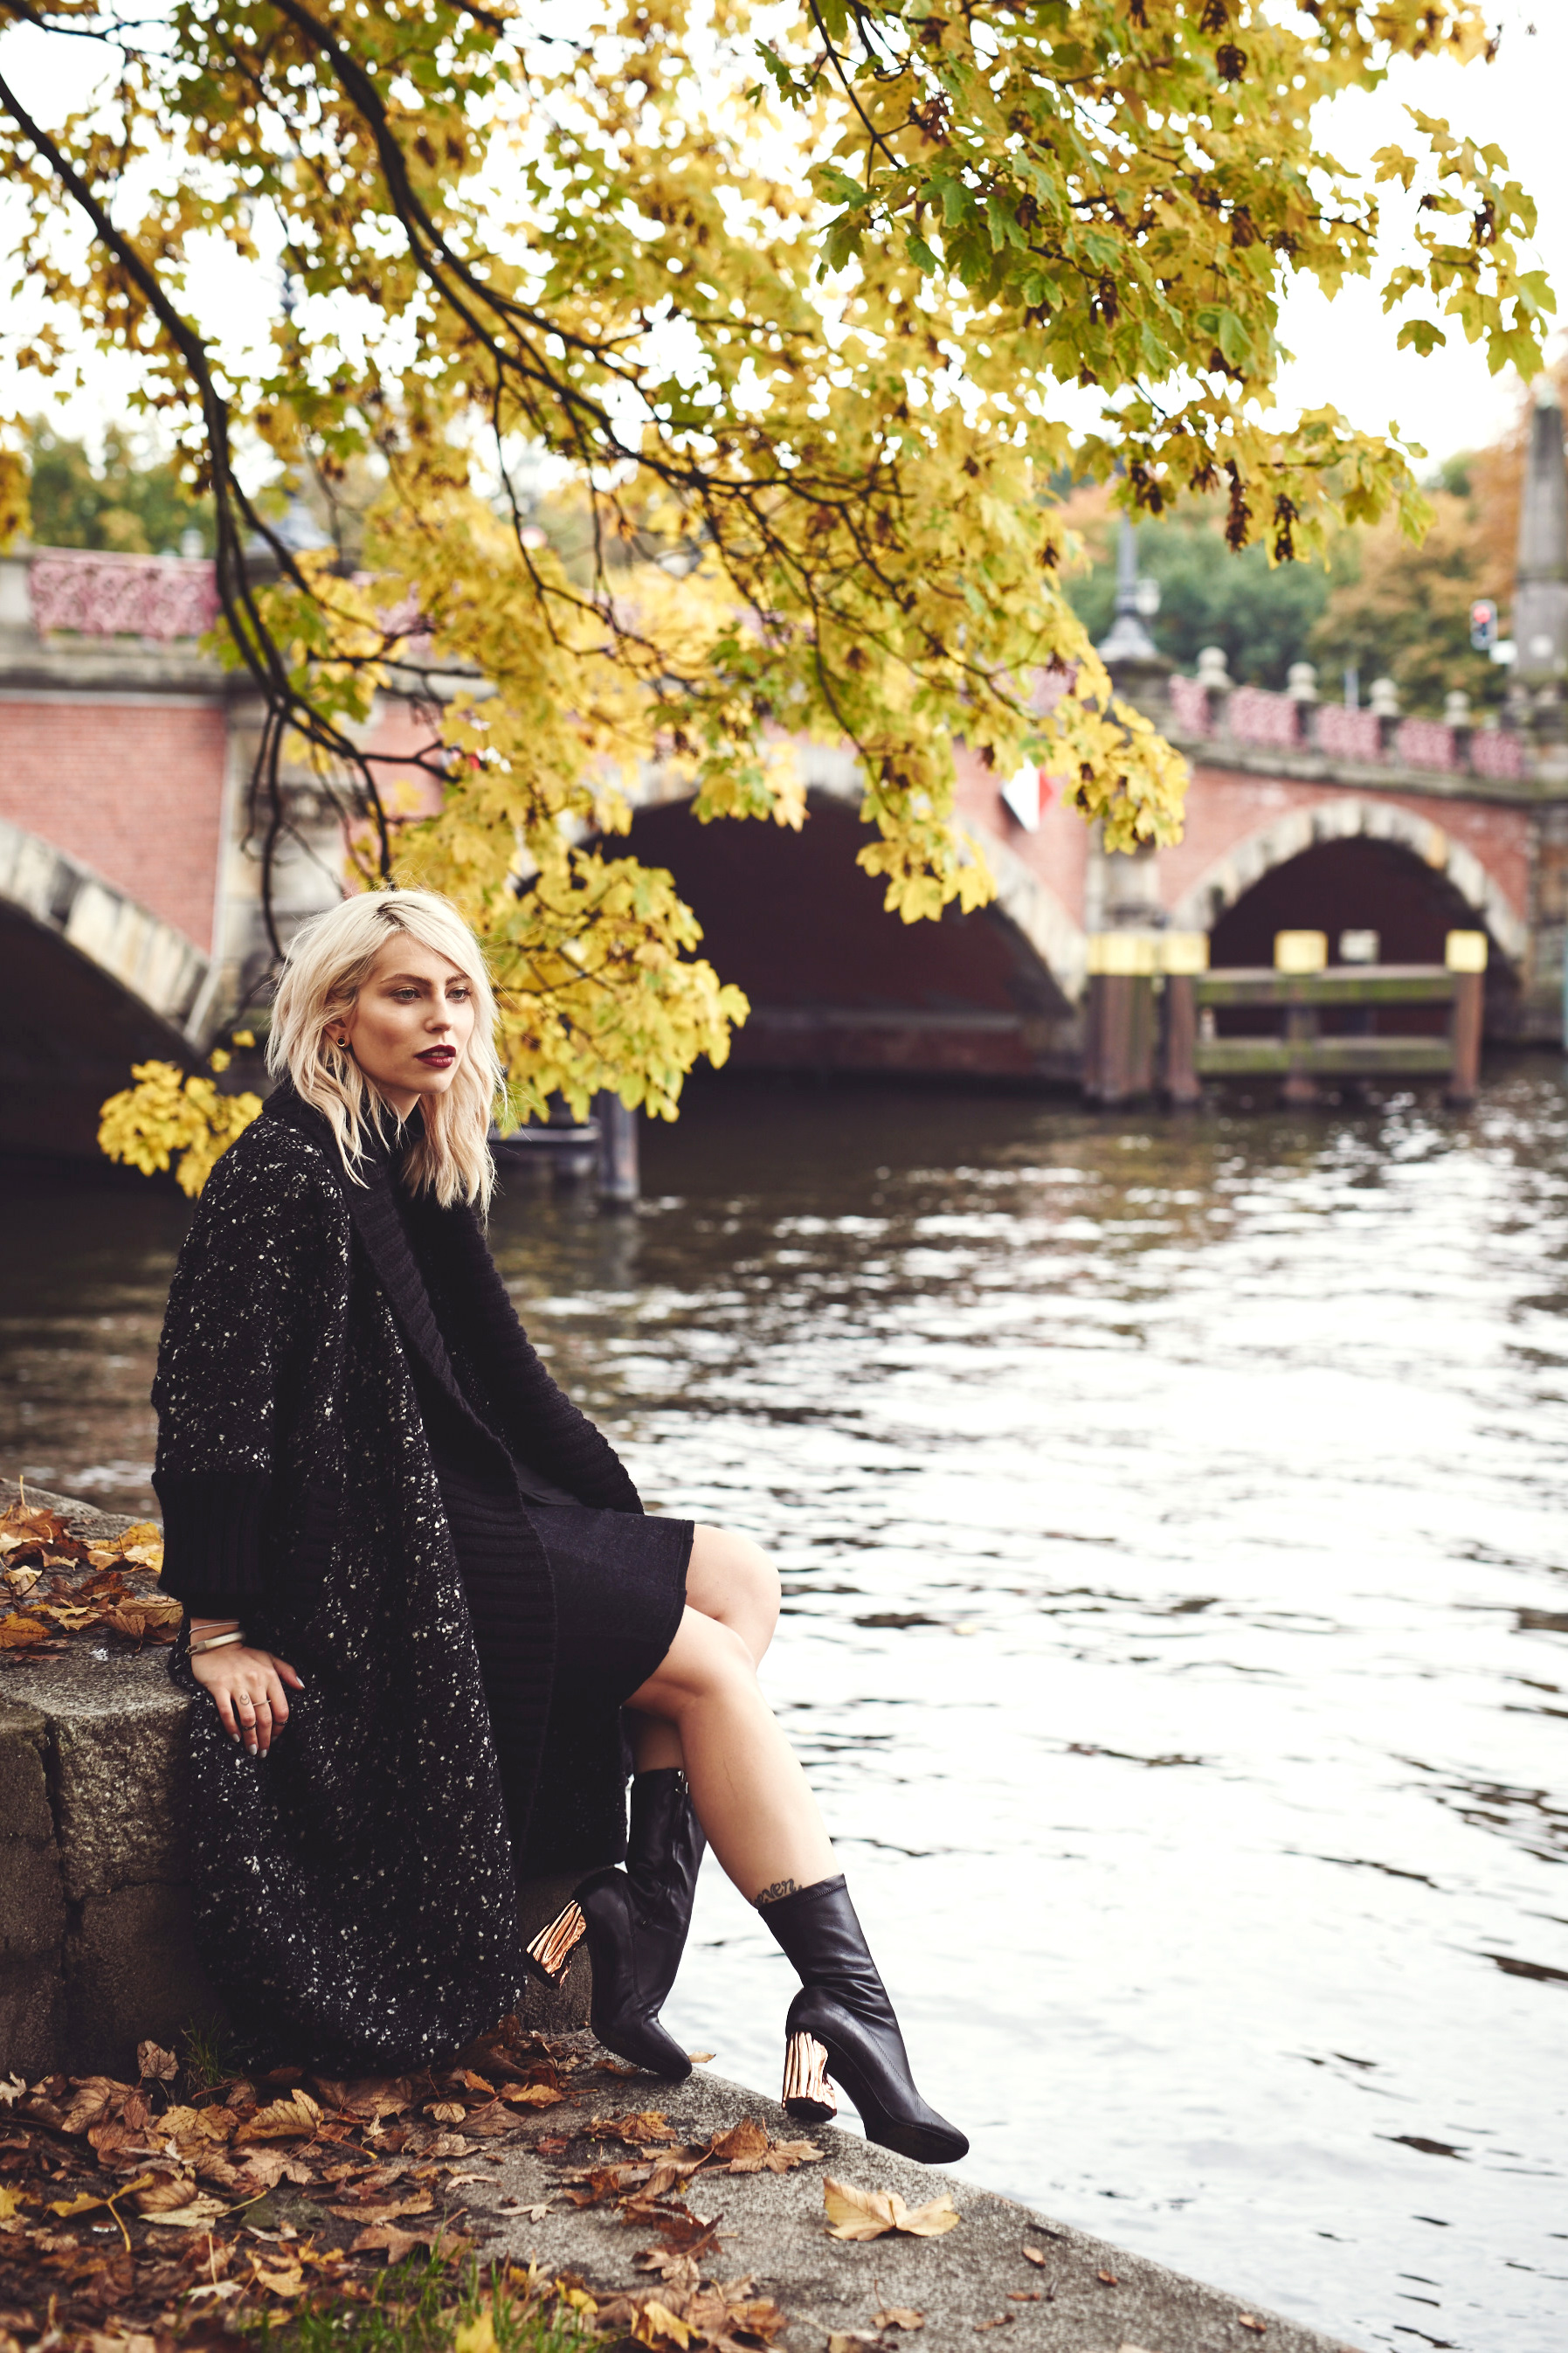 view all the details on my blog | fall/autumn outfit | comfy & black style | via Masha Sedgwick, fashion blogger from Berlin